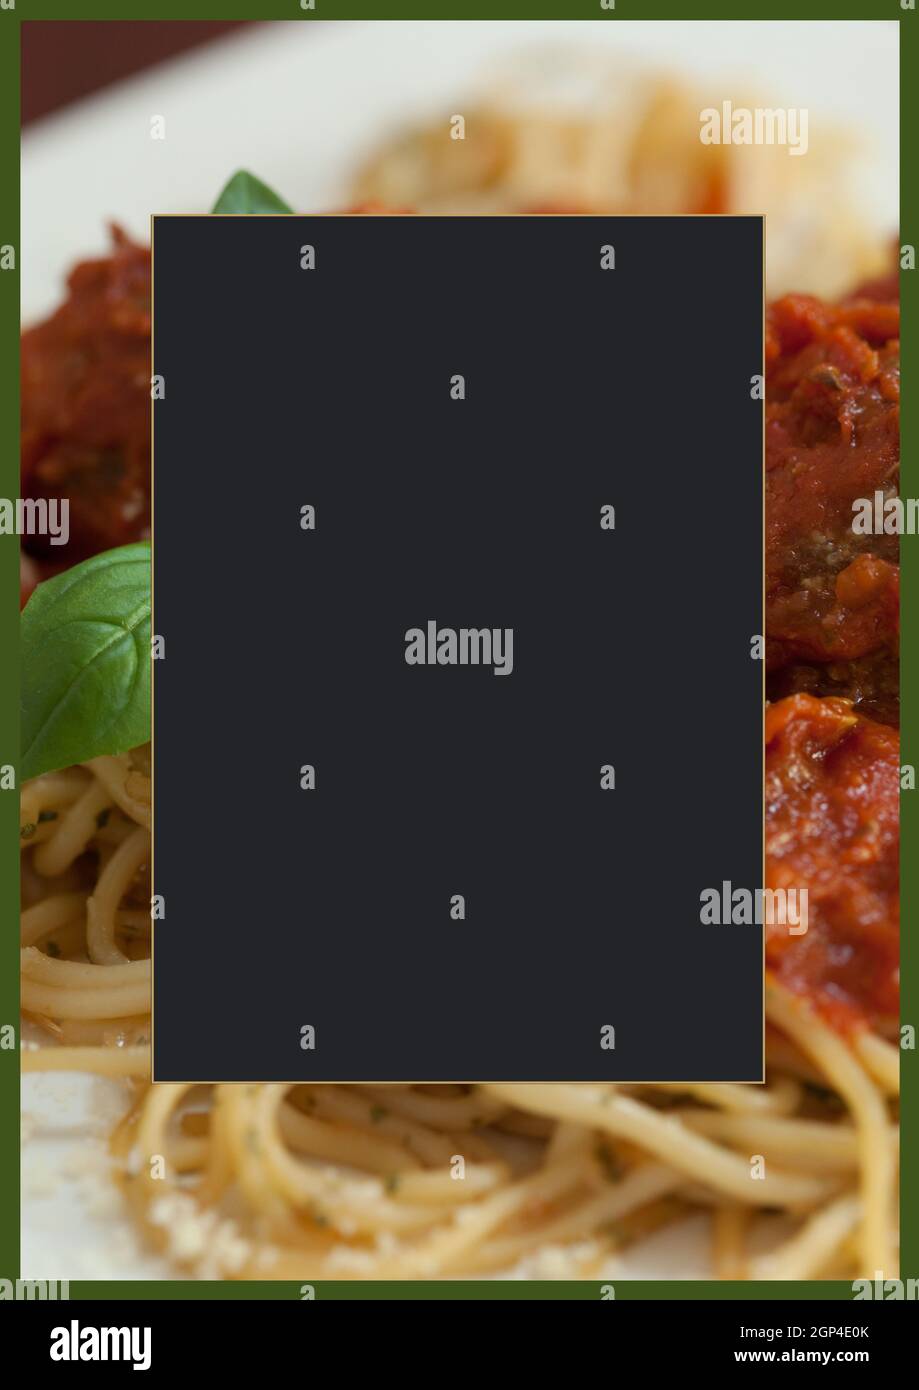 Composition of black frame over close up of spaghetti Stock Photo